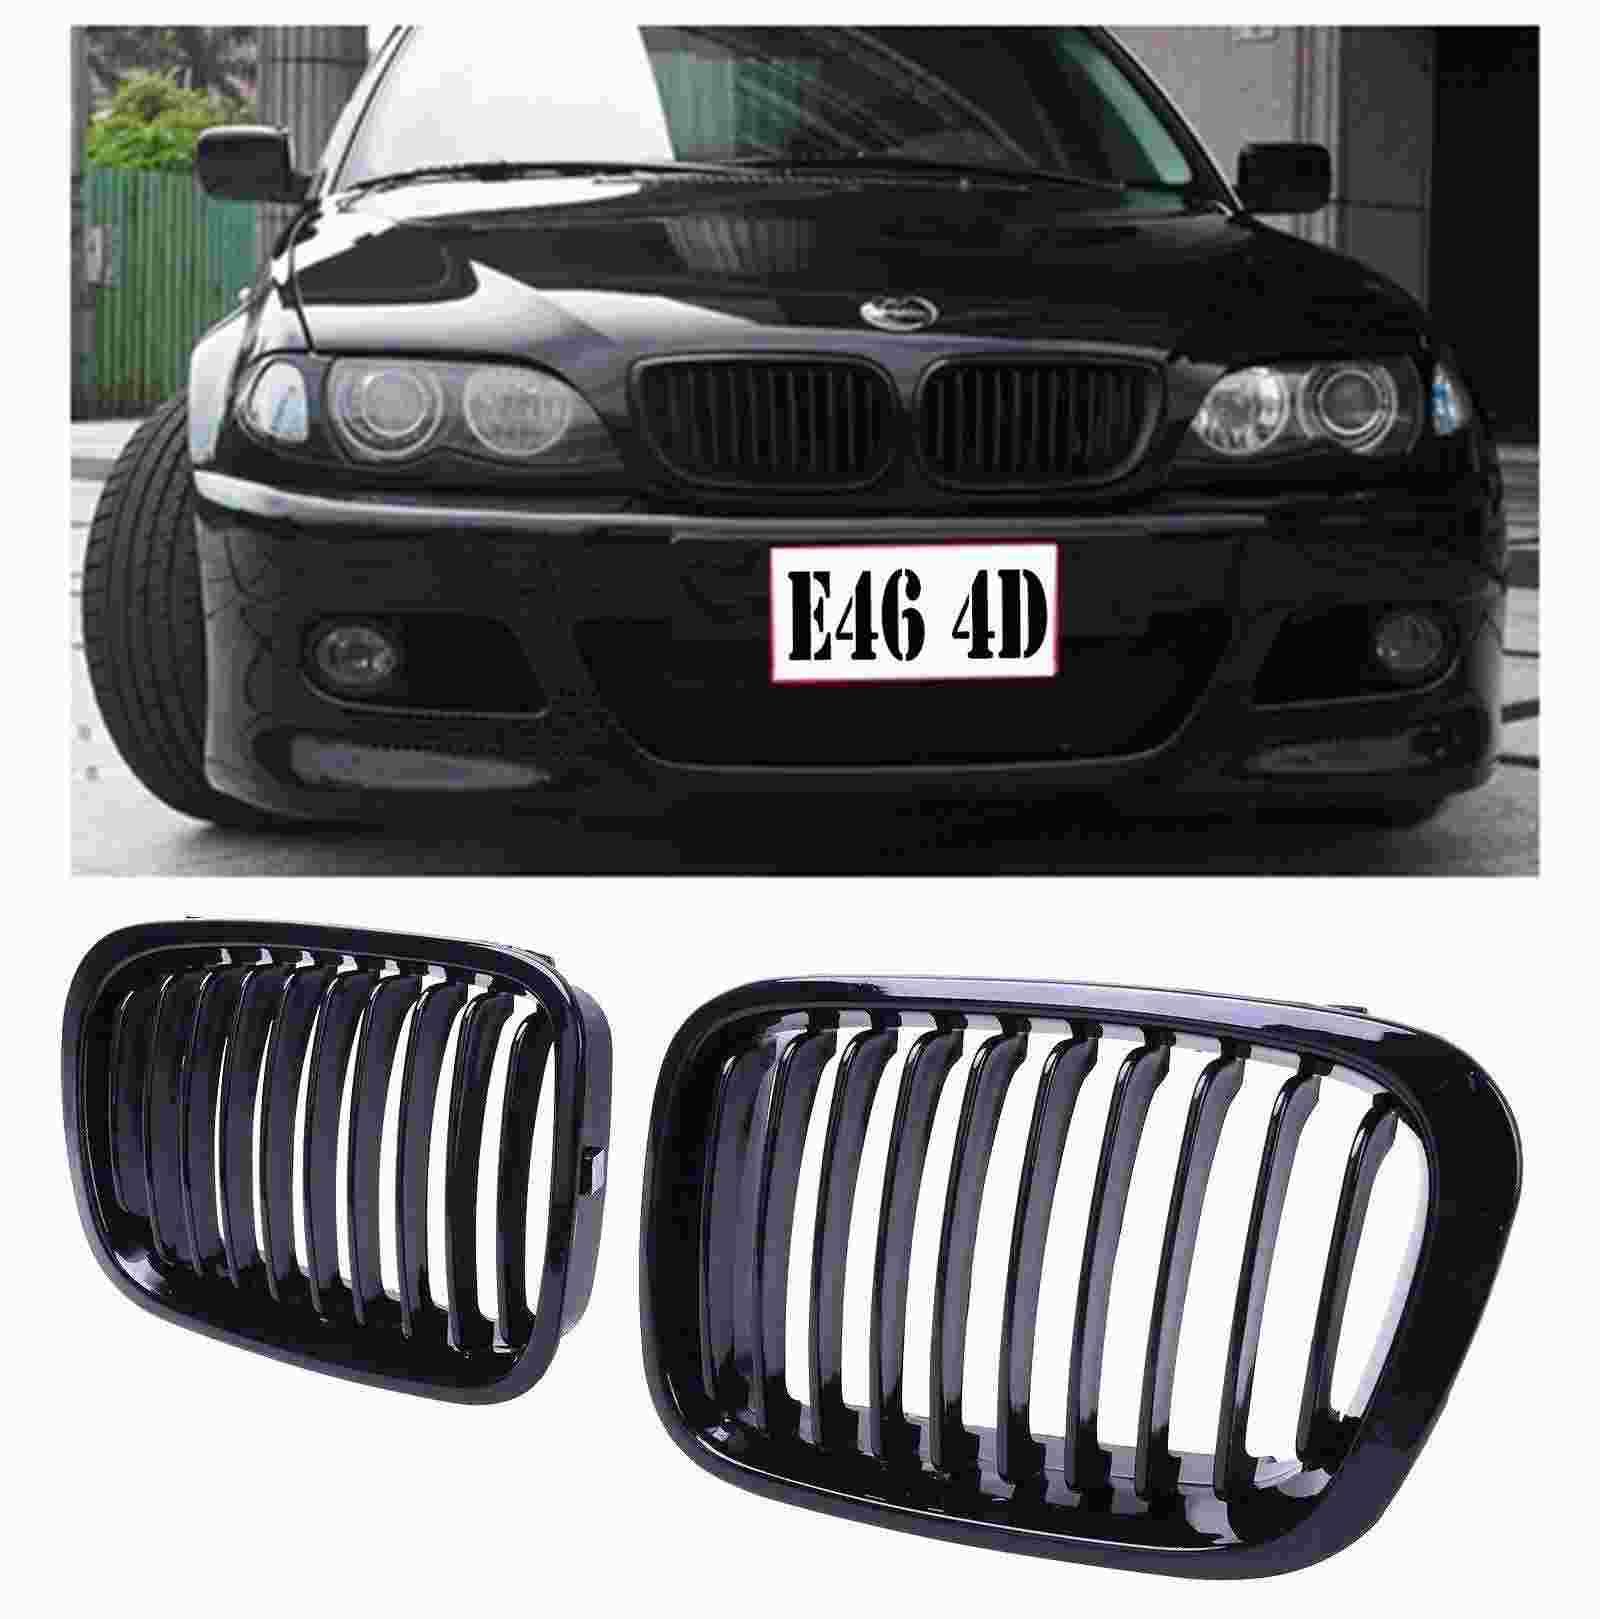 2019 2X Gloss Black Front Kidney Grills Grille Fit BMW For BMW E46 